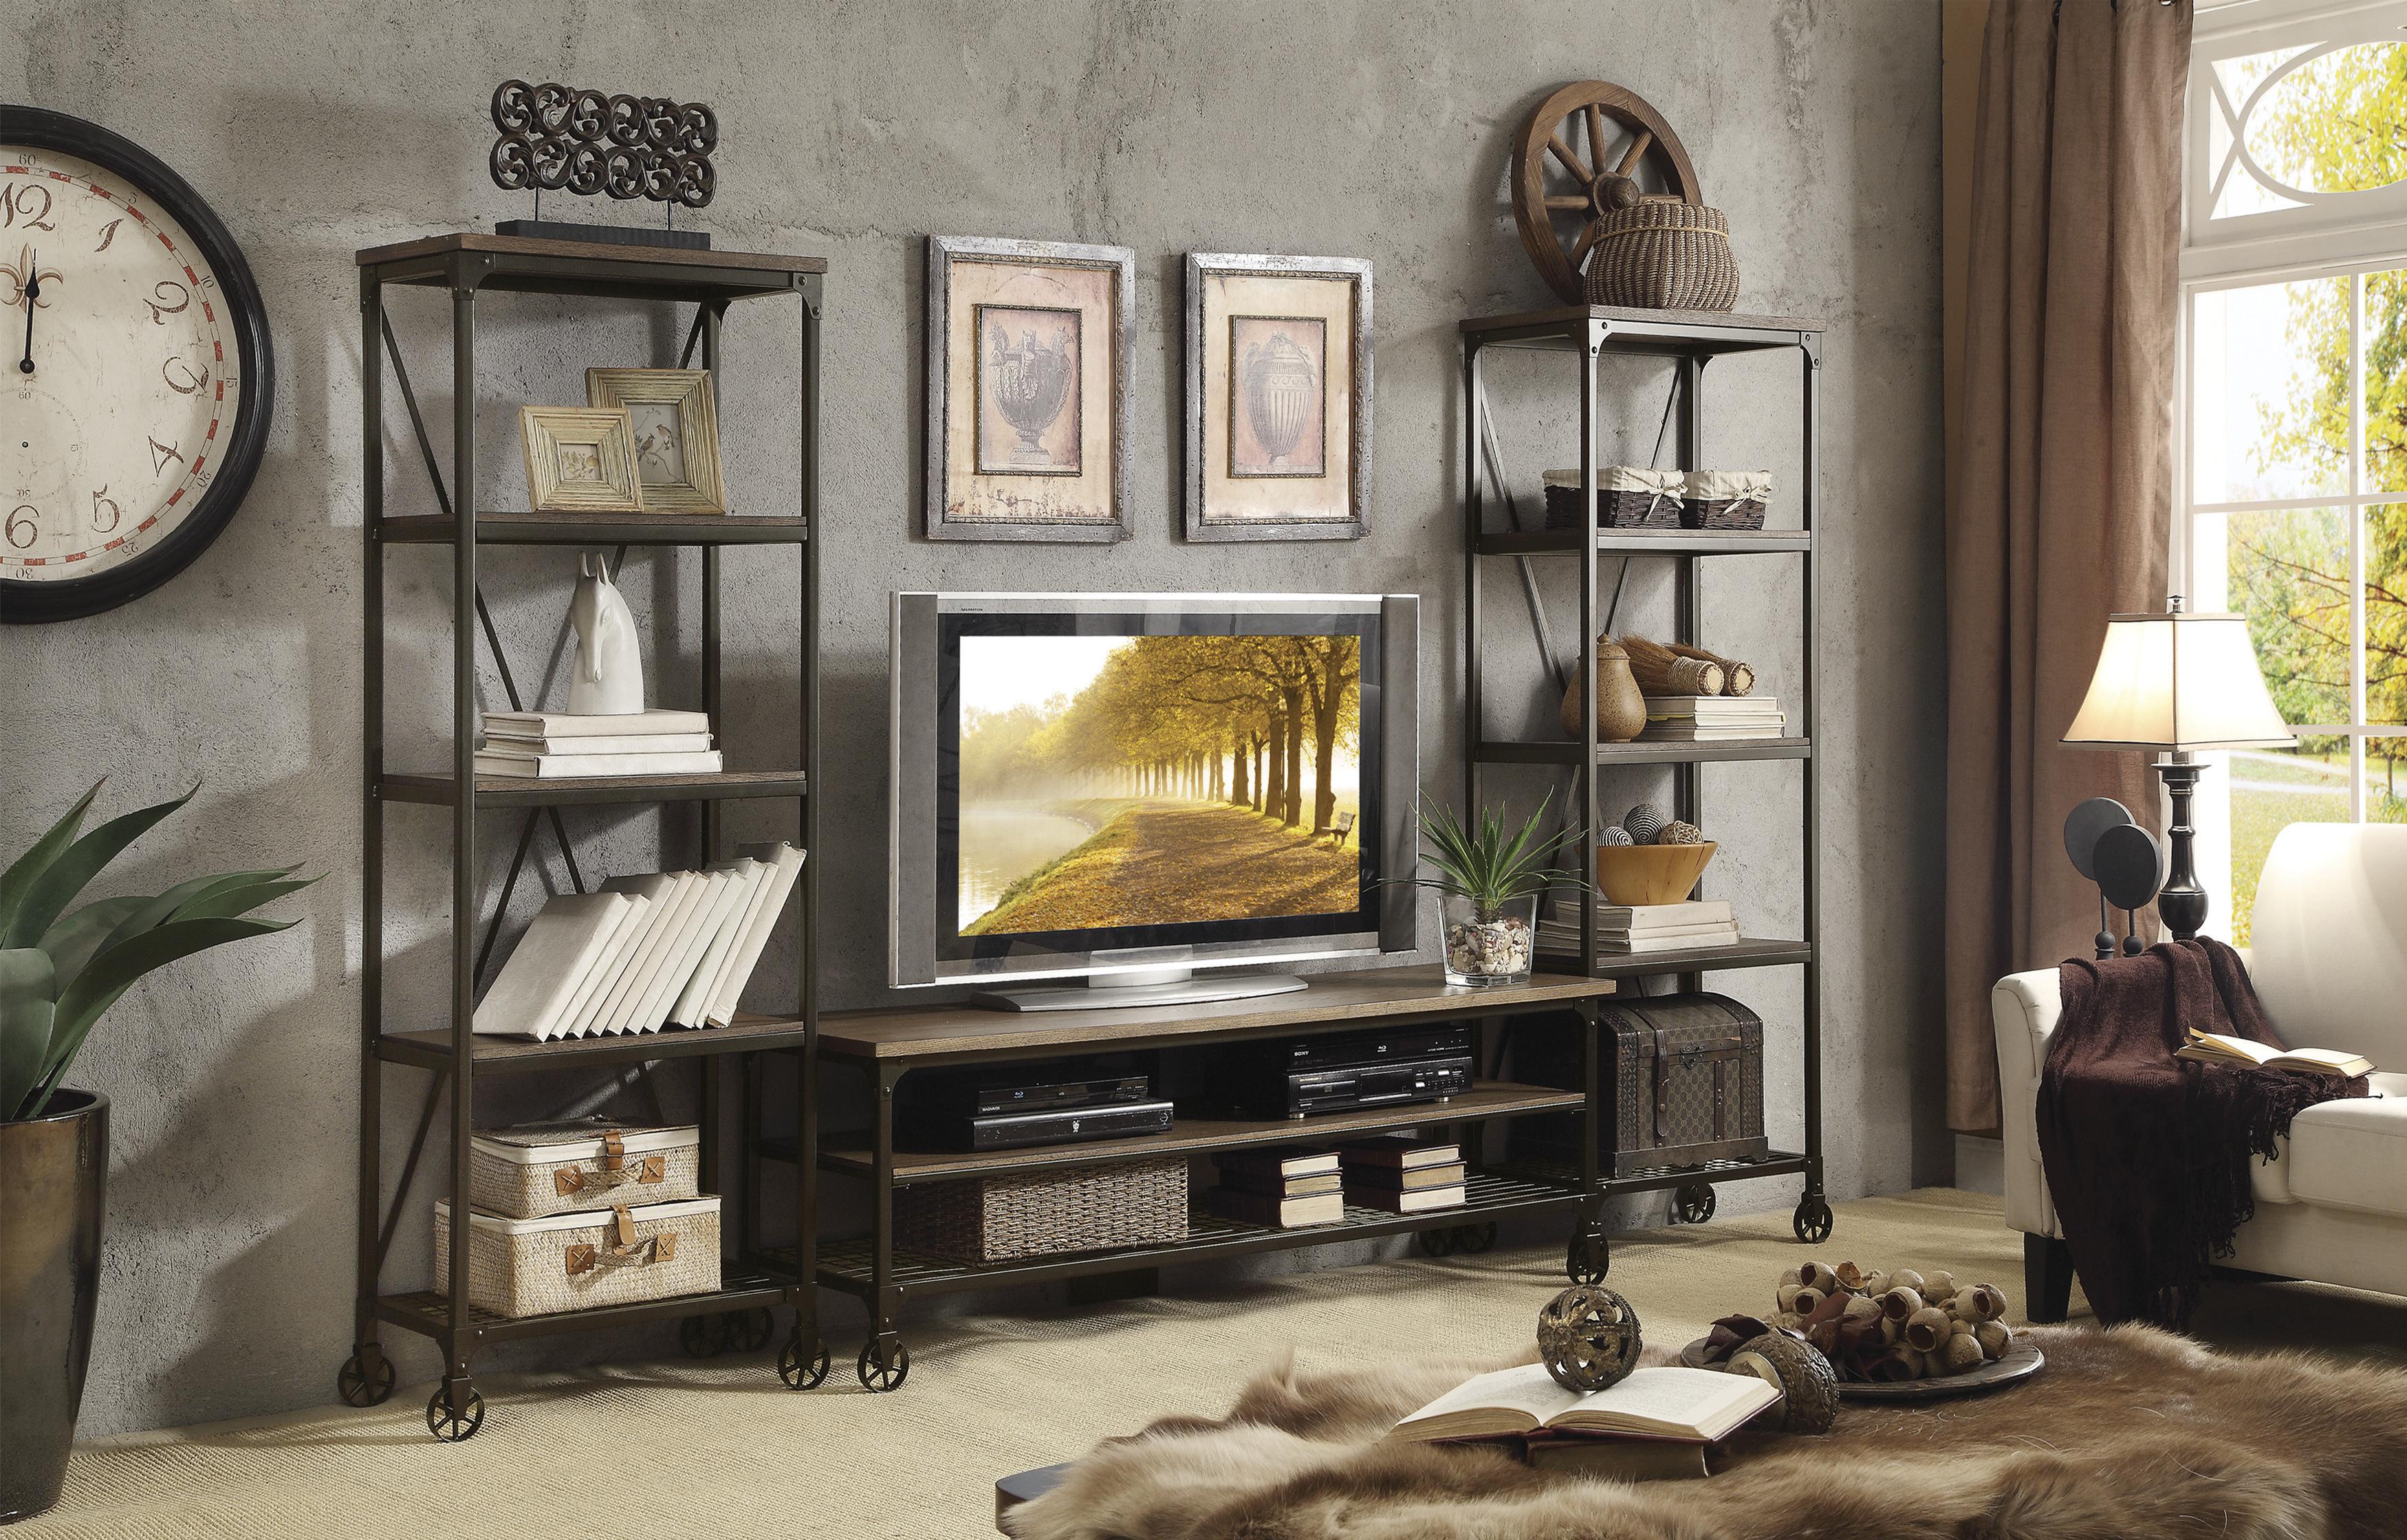 

    
Transitional Weathered Natural Engineered Wood TV Stand Set 3PCS Homelegance Millwood 50990-T
